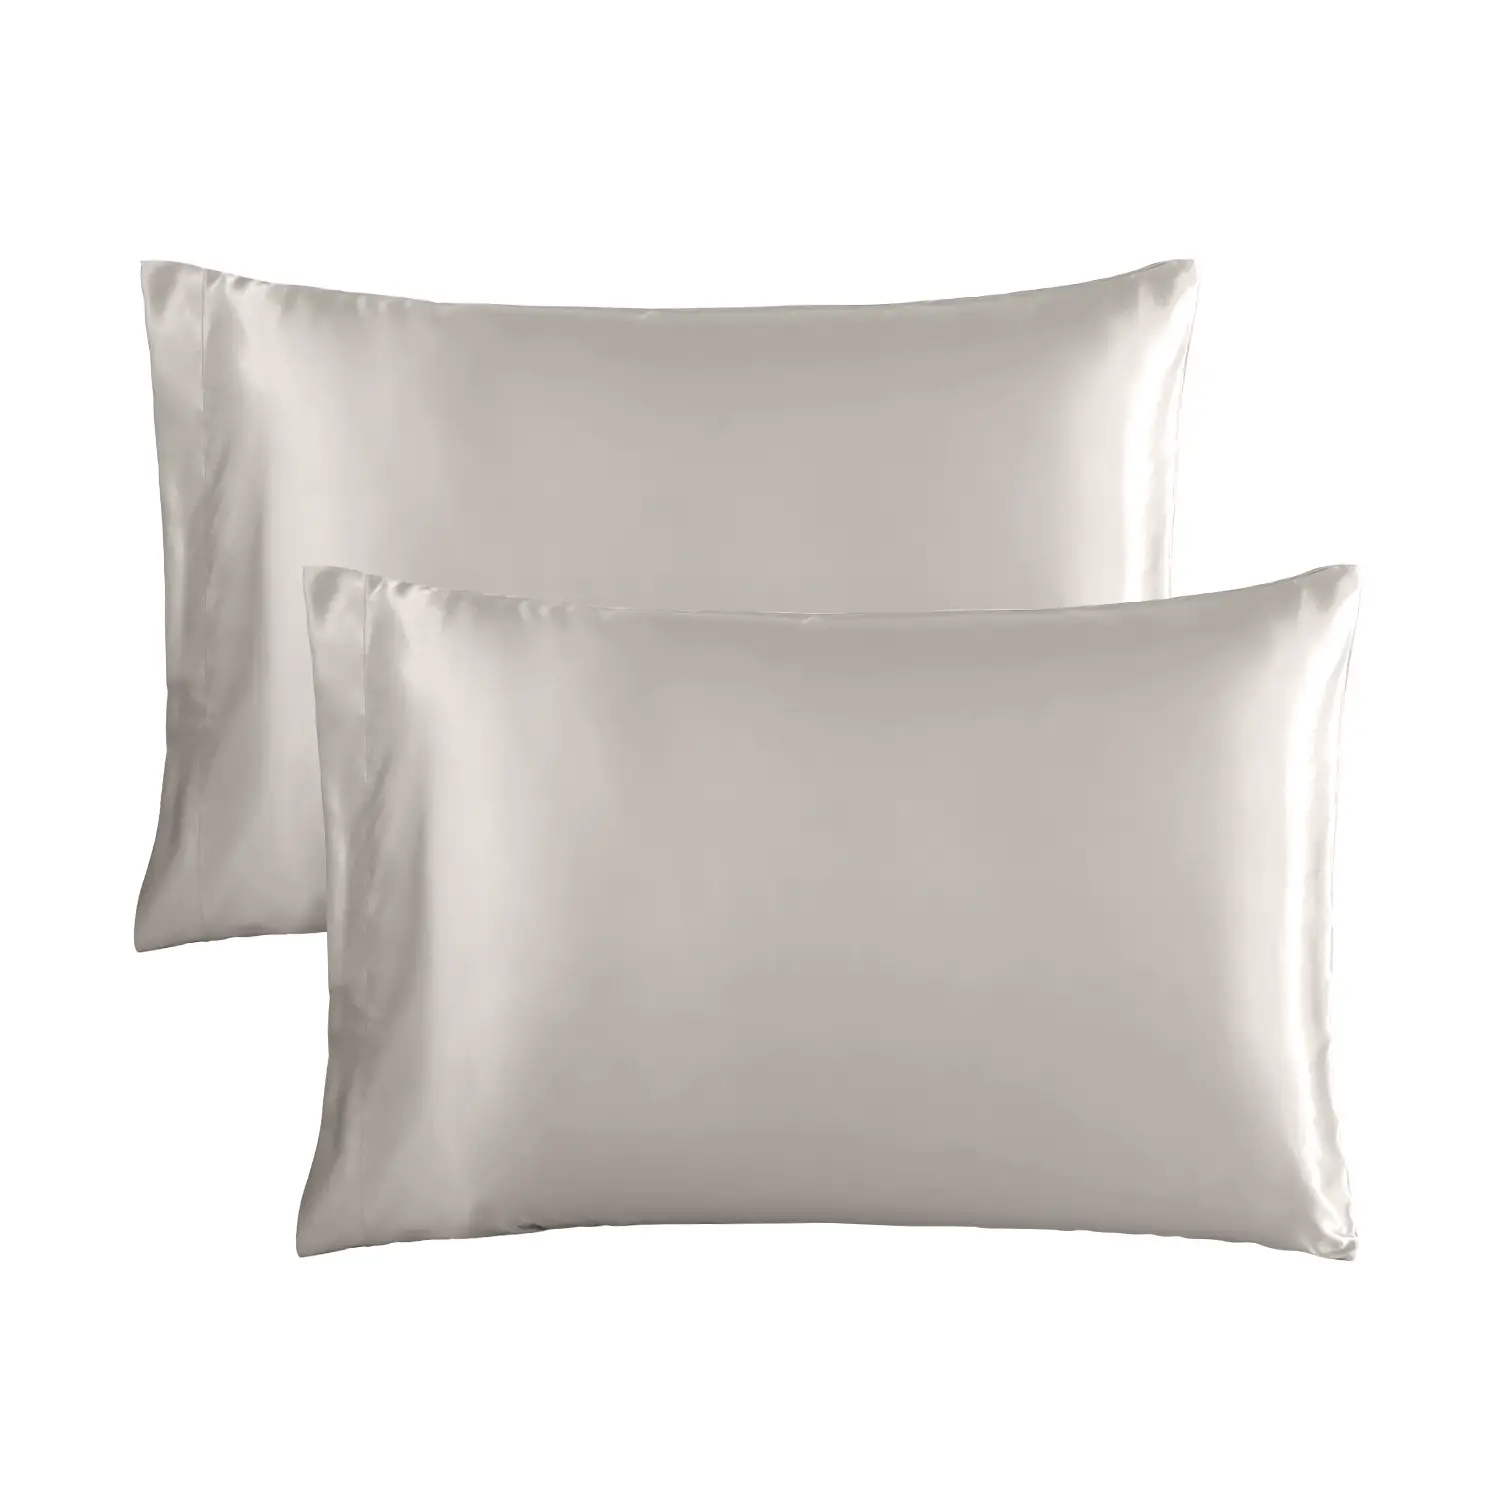 HAOK Satin Pillowcase for Hair and Skin, Silky Soft Pillow Cover with Envelop Closure - 2 Pack